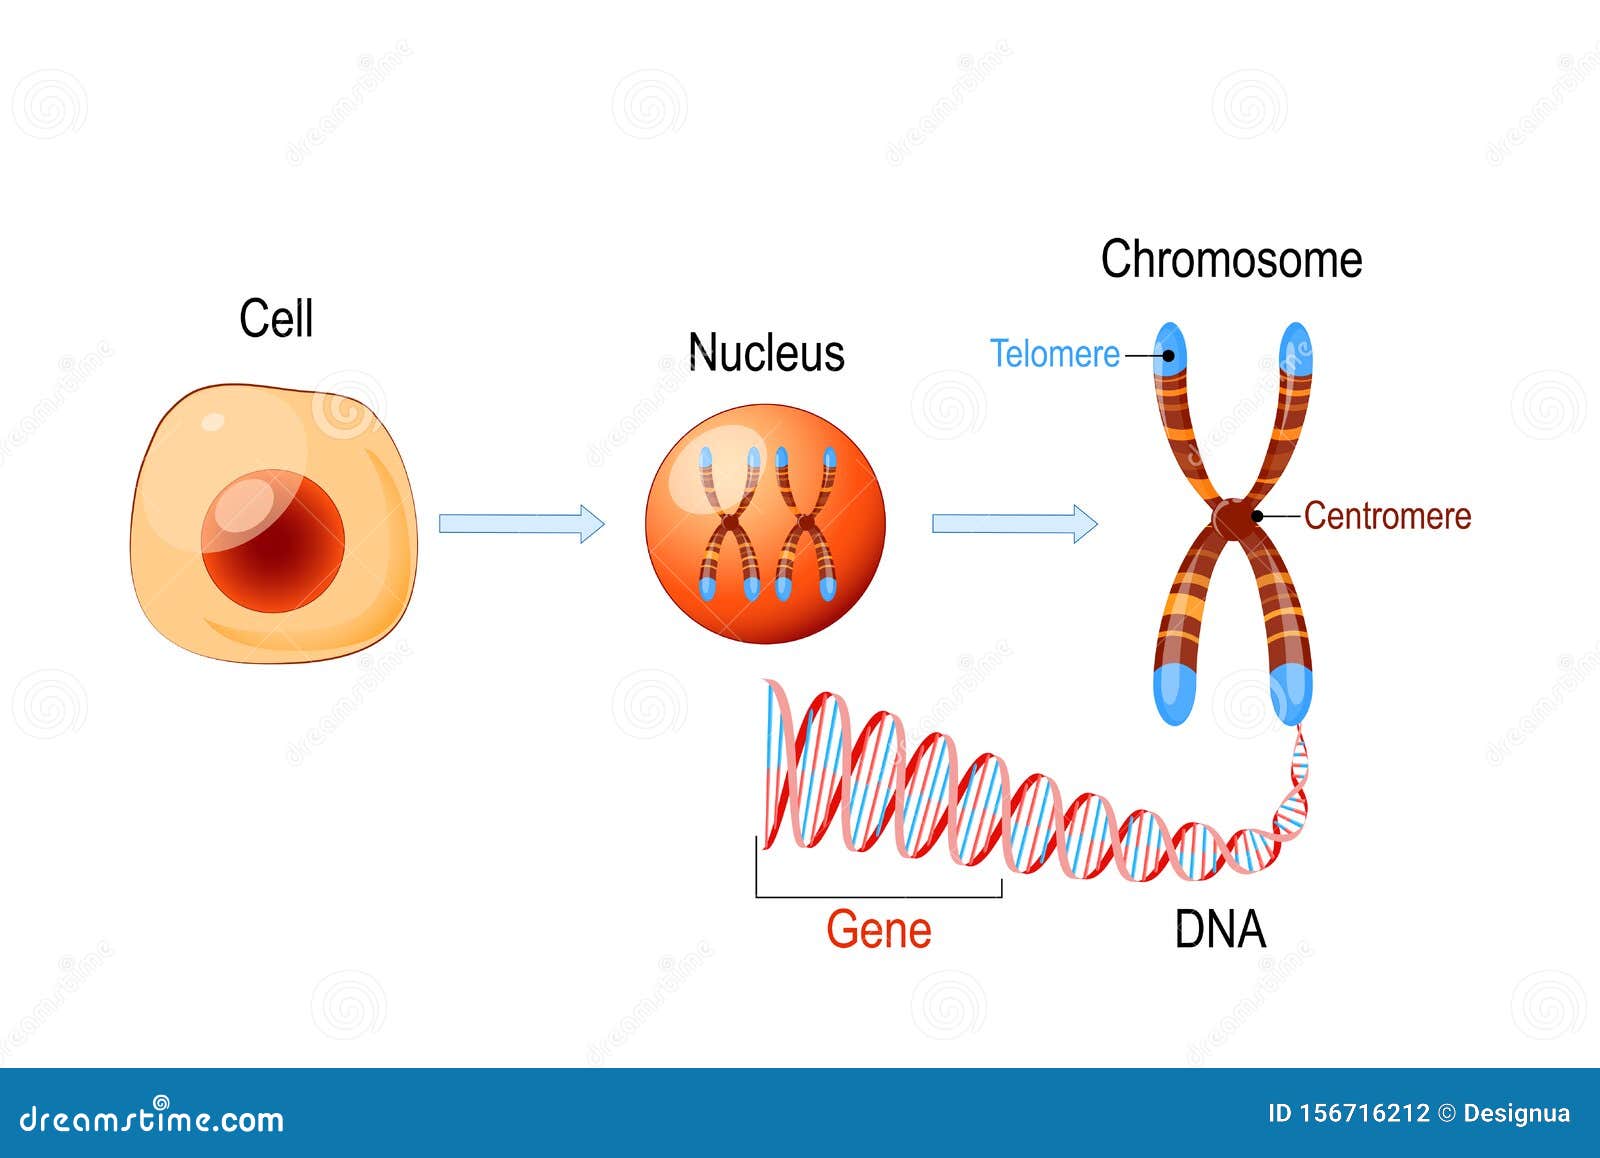 cell structure. nucleus with chromosomes, dna molecule, telomere and gene